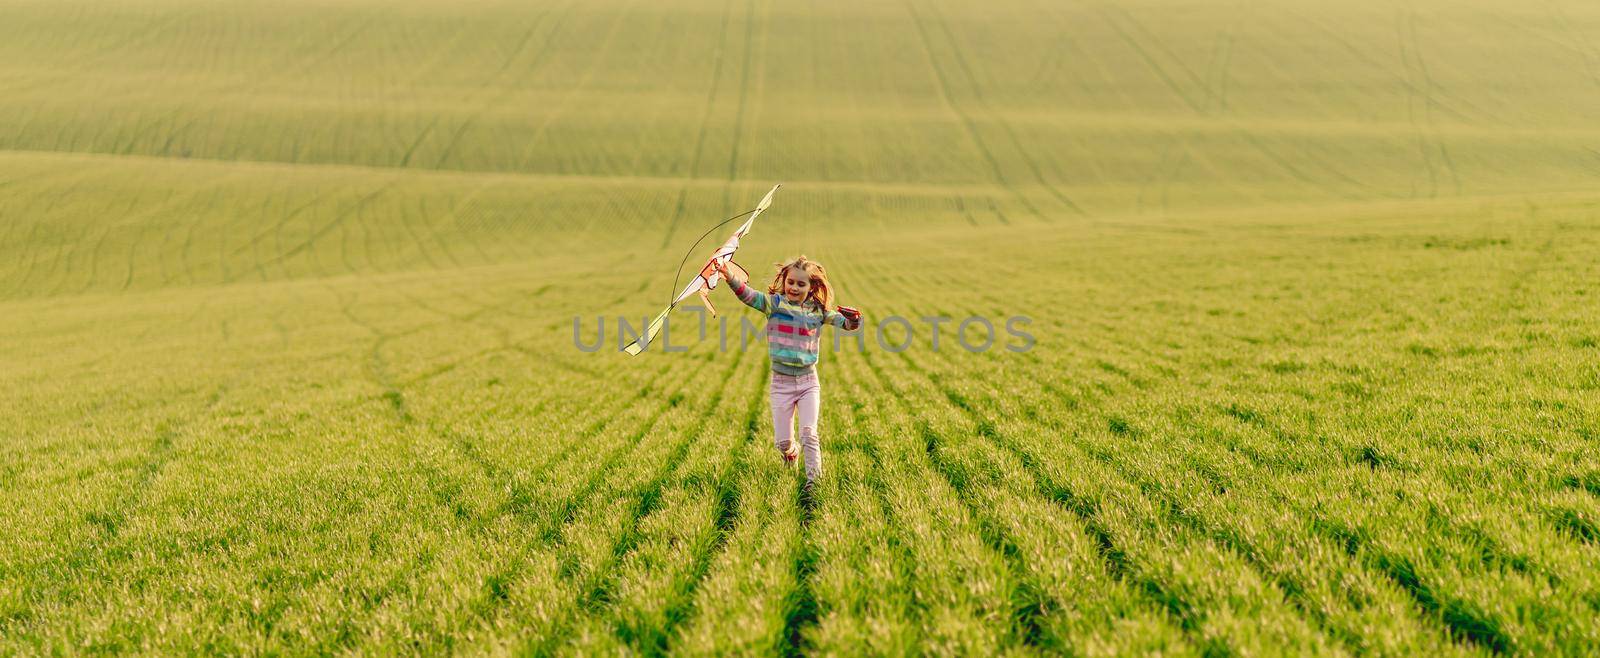 Beautiful little girl playing with kite by tan4ikk1